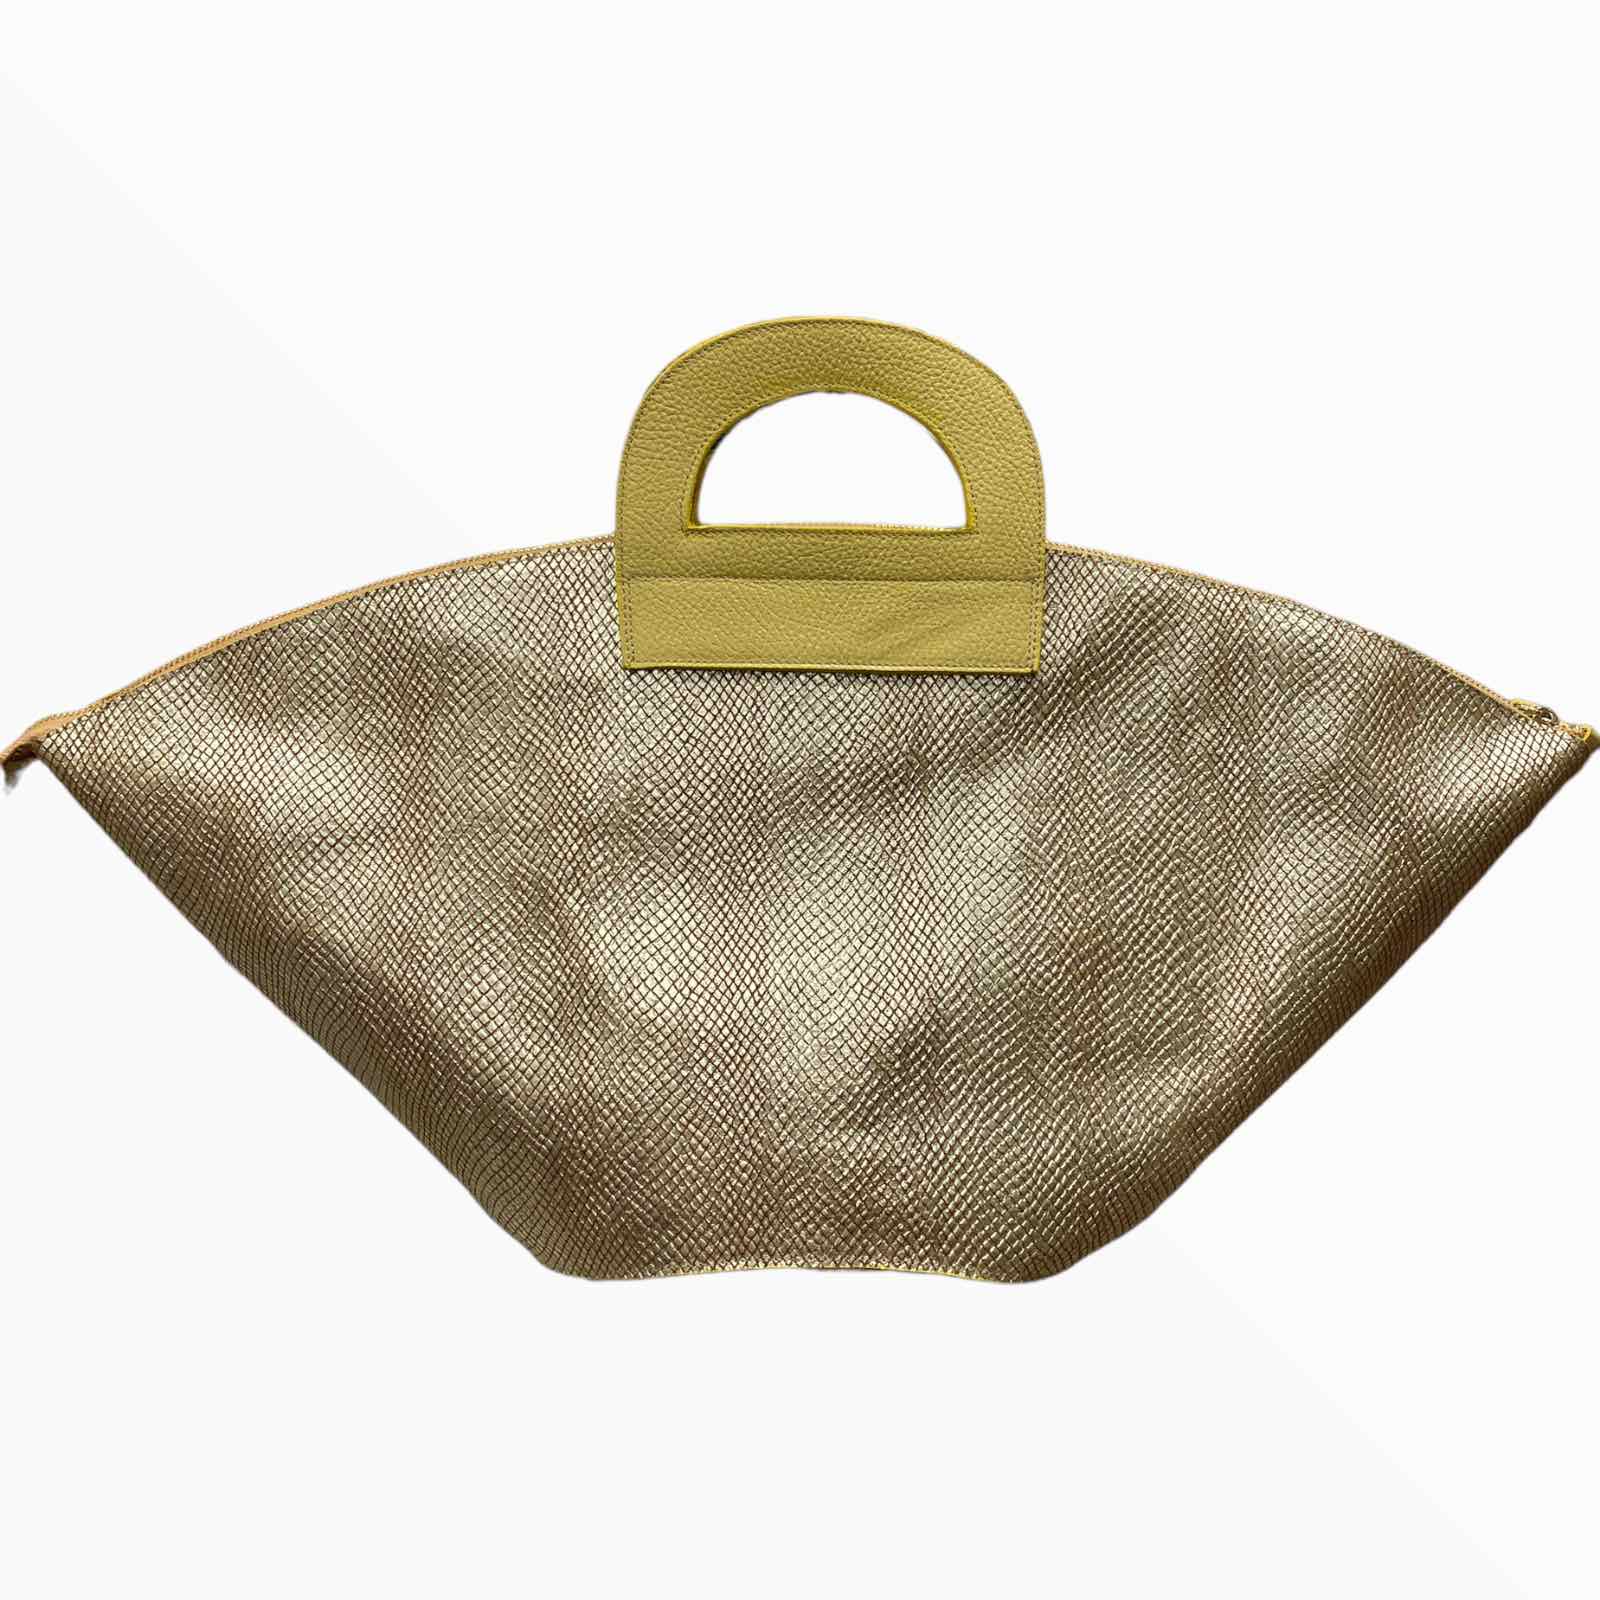 Zebyli. Yellow and gold leather tote bag